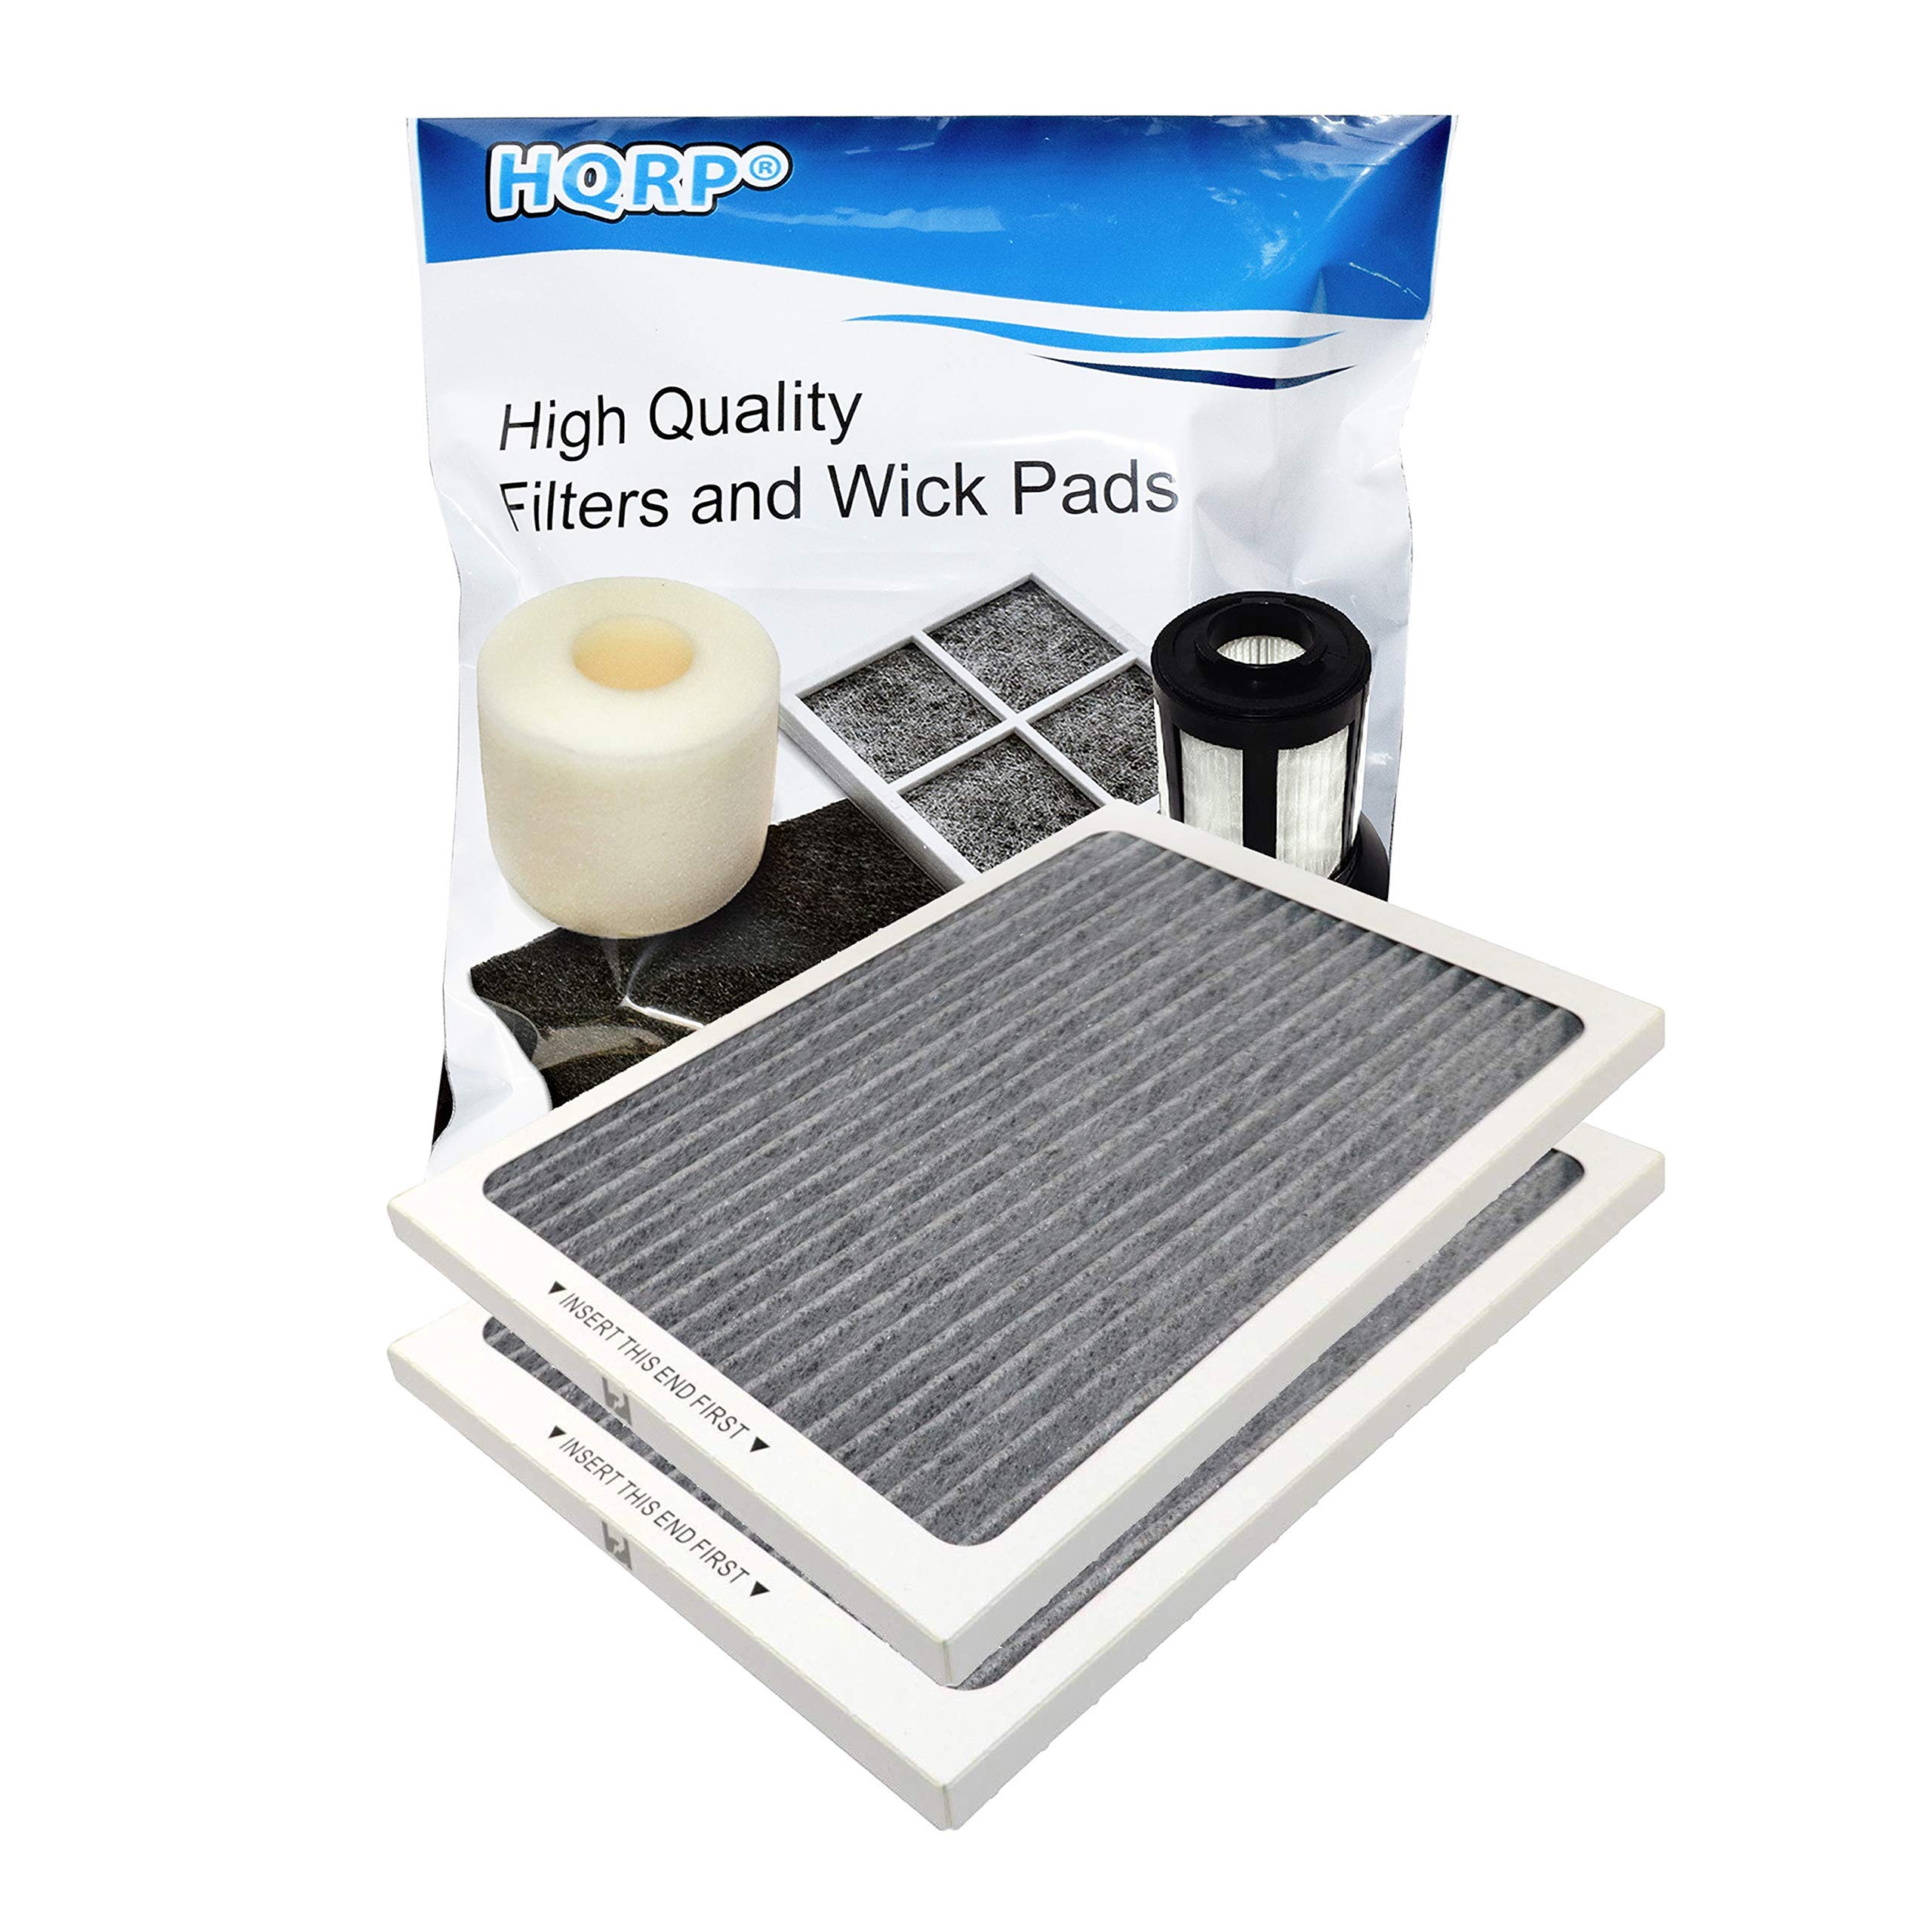 HQRP Carbon Air Filter (2-pack) for Frigidaire Gallery & Professional series Side-by-Side / French door Refrigerators, EAFCBF PAULTRA - image 1 of 7